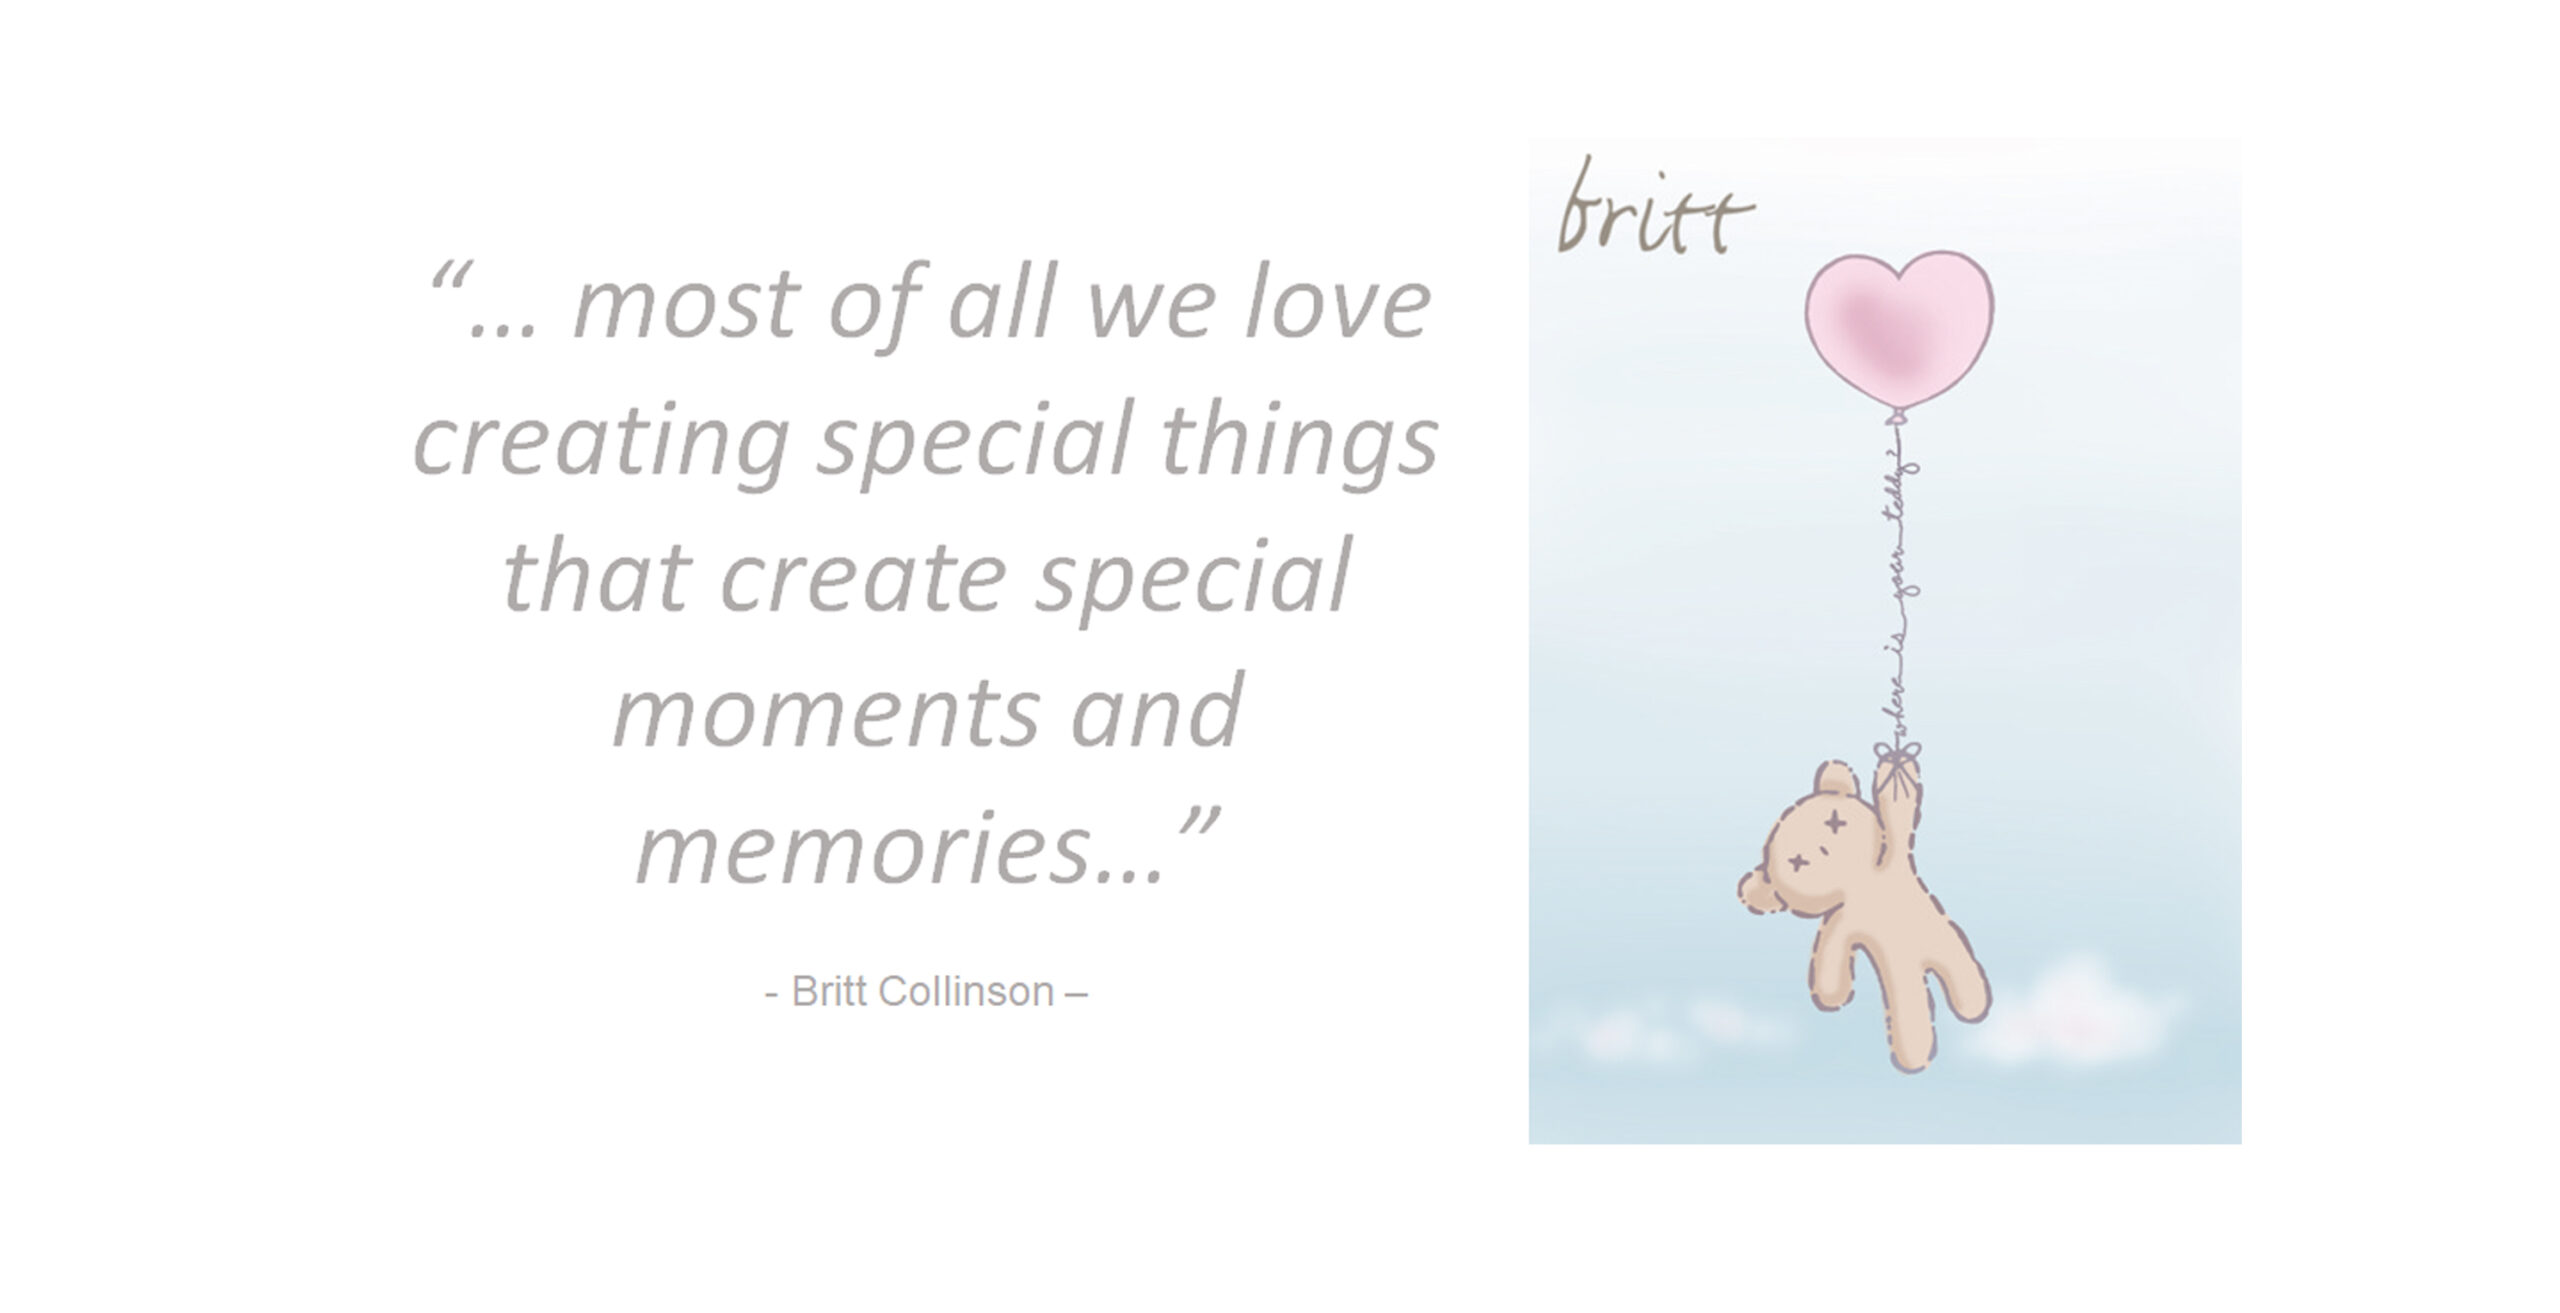 Britt Bears loves creating special moments and memories